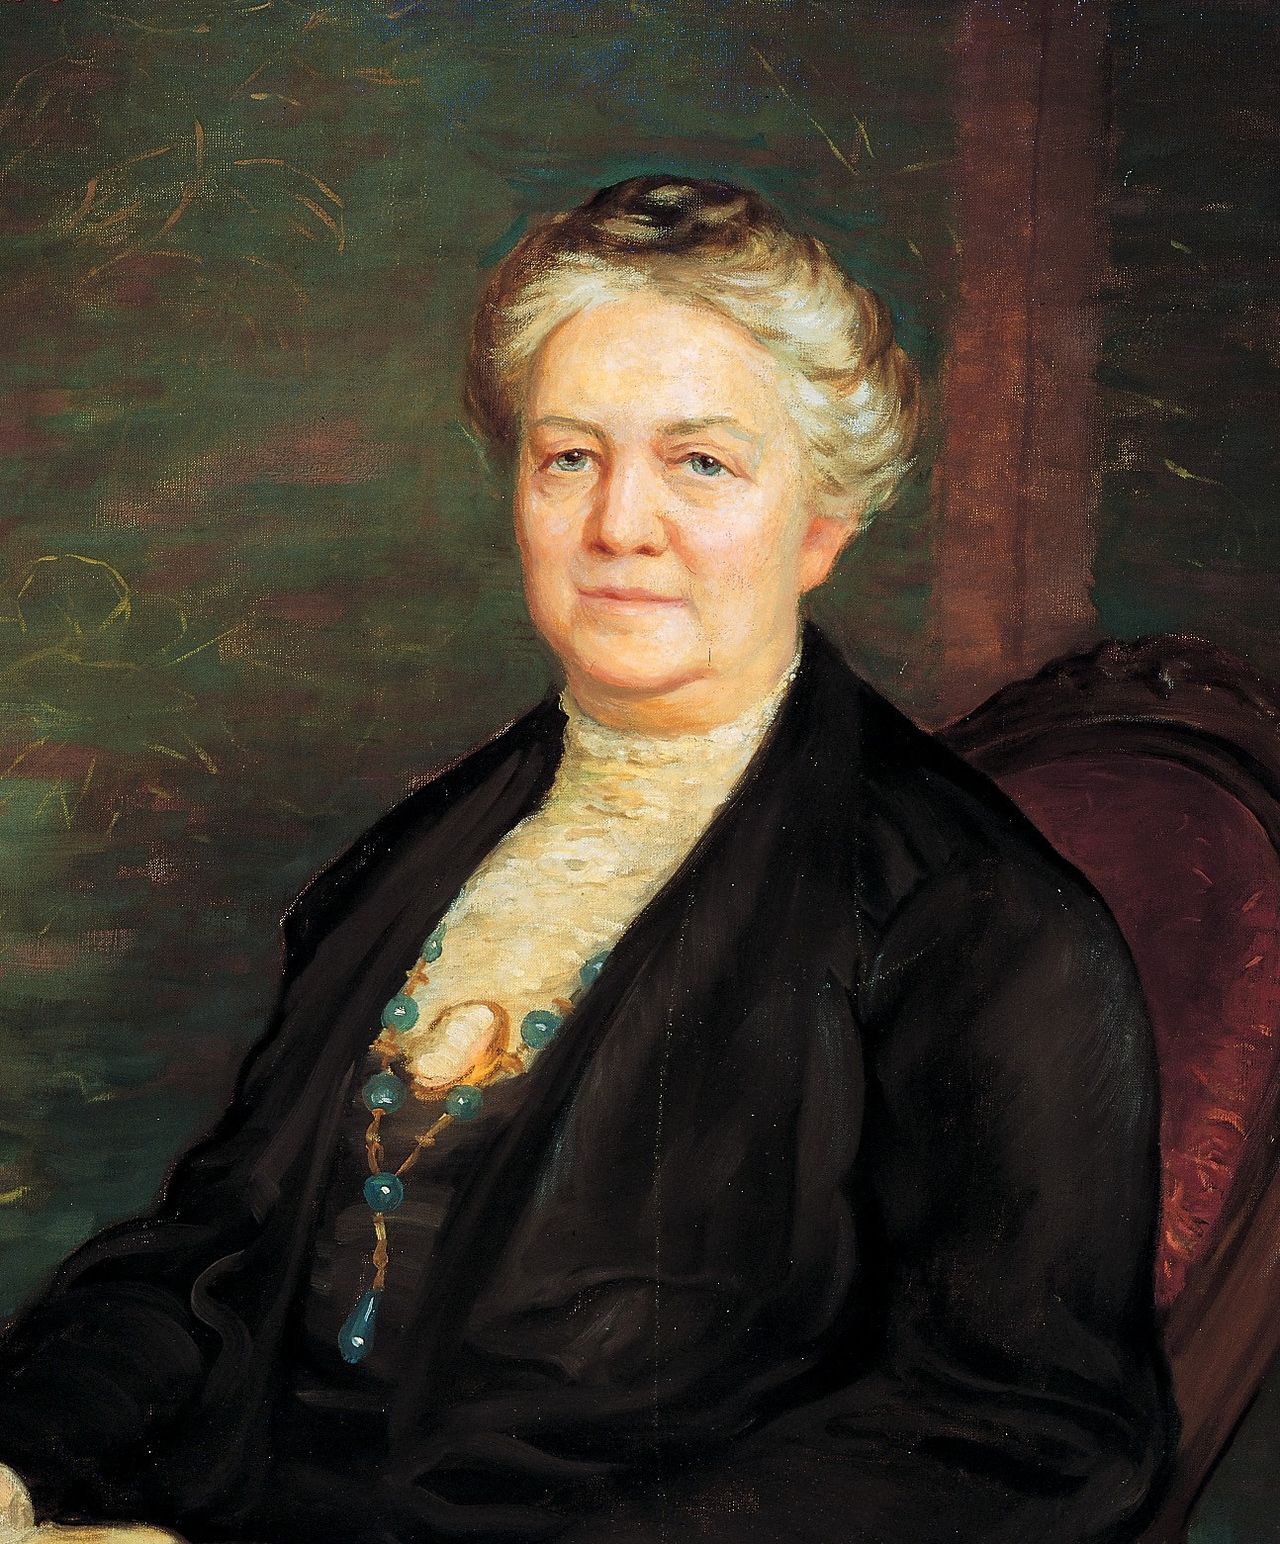 A portrait of Clarissa Smith Williams, who was the sixth general president of the Relief Society from 1921 to 1928; painted by Lee Greene Richards.